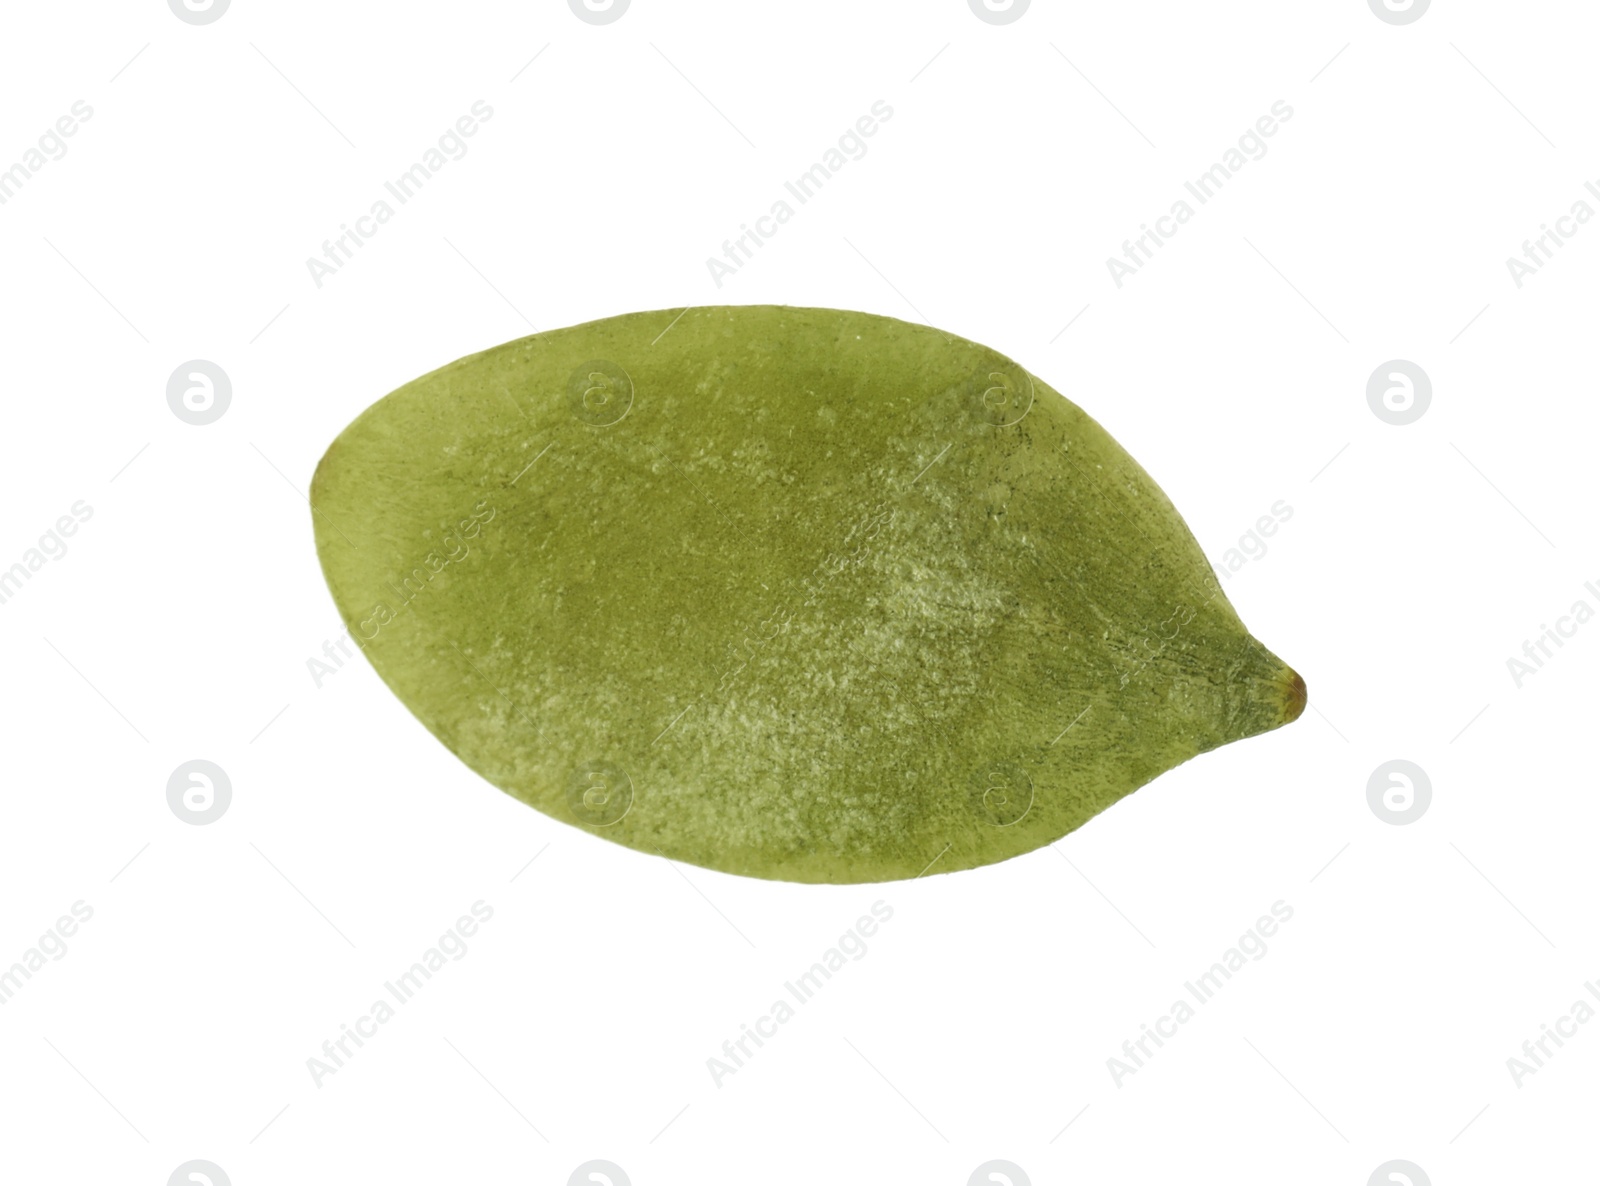 Photo of One peeled pumpkin seed isolated on white